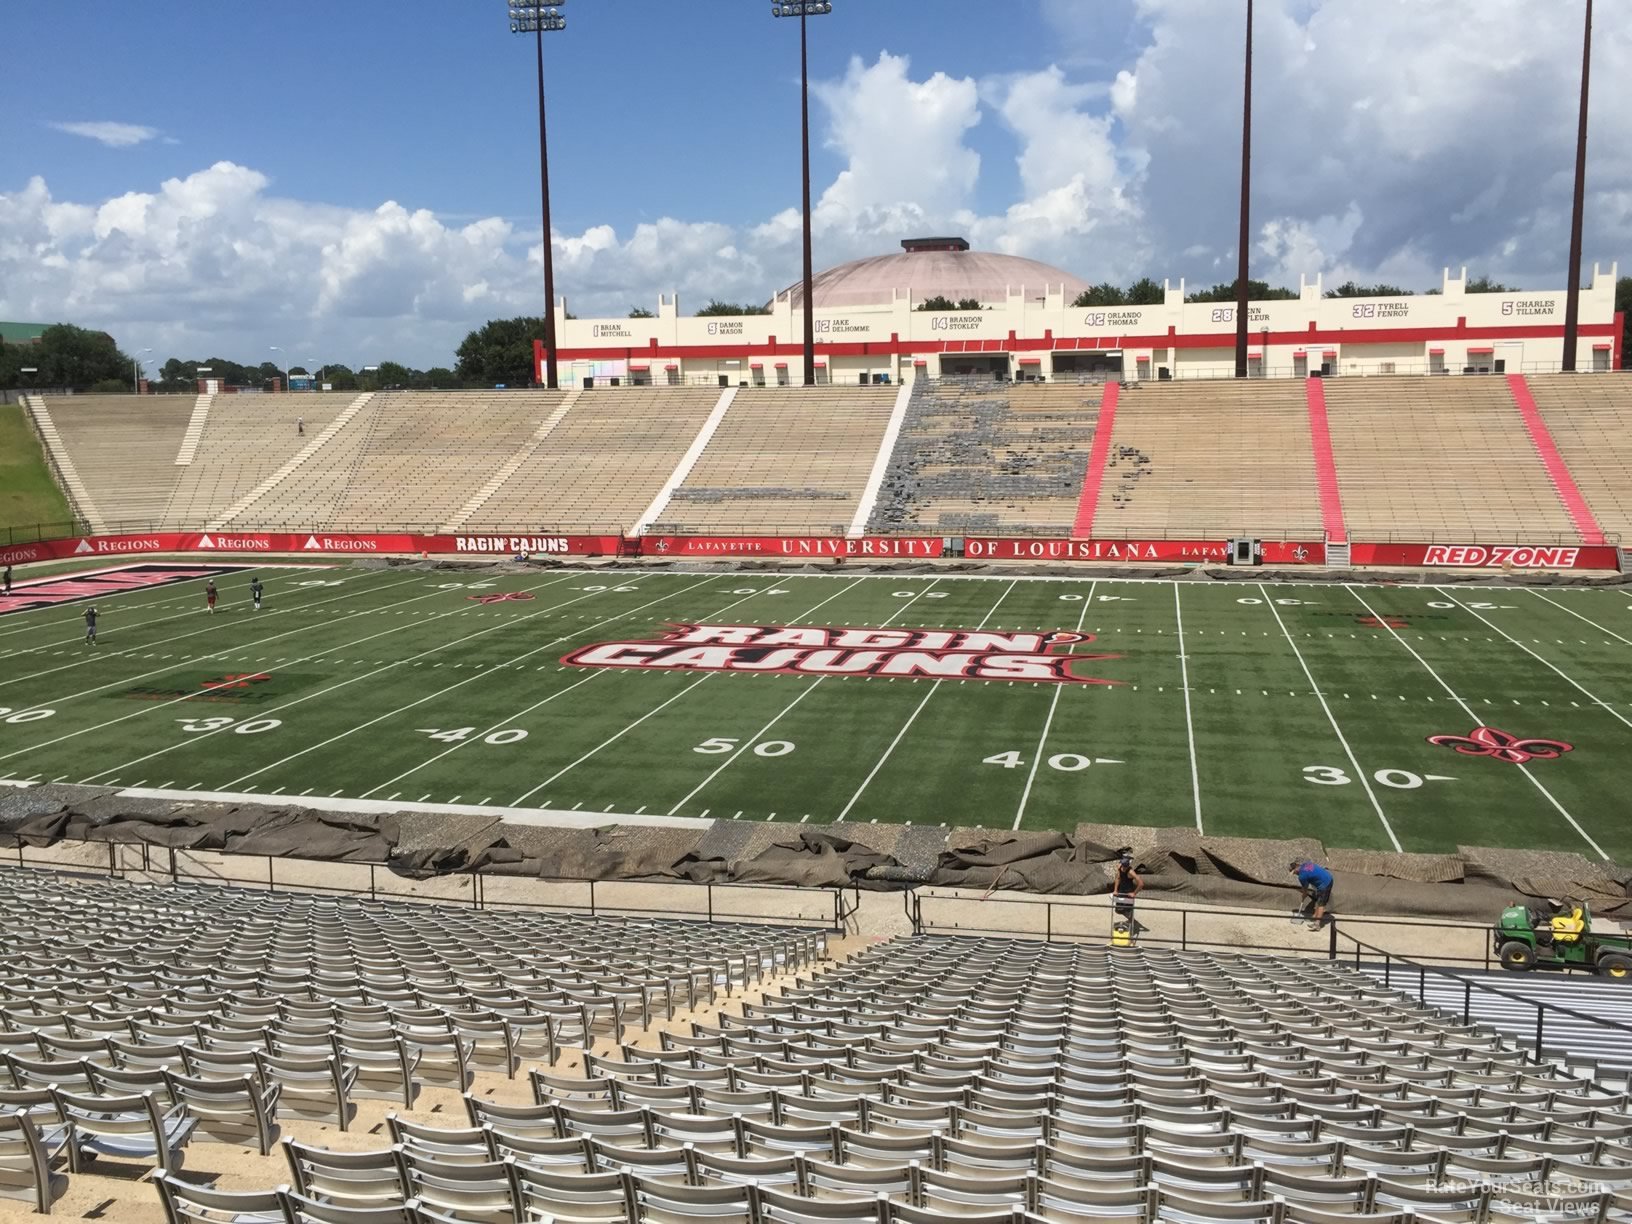 section d1, row 30 seat view  - cajun field